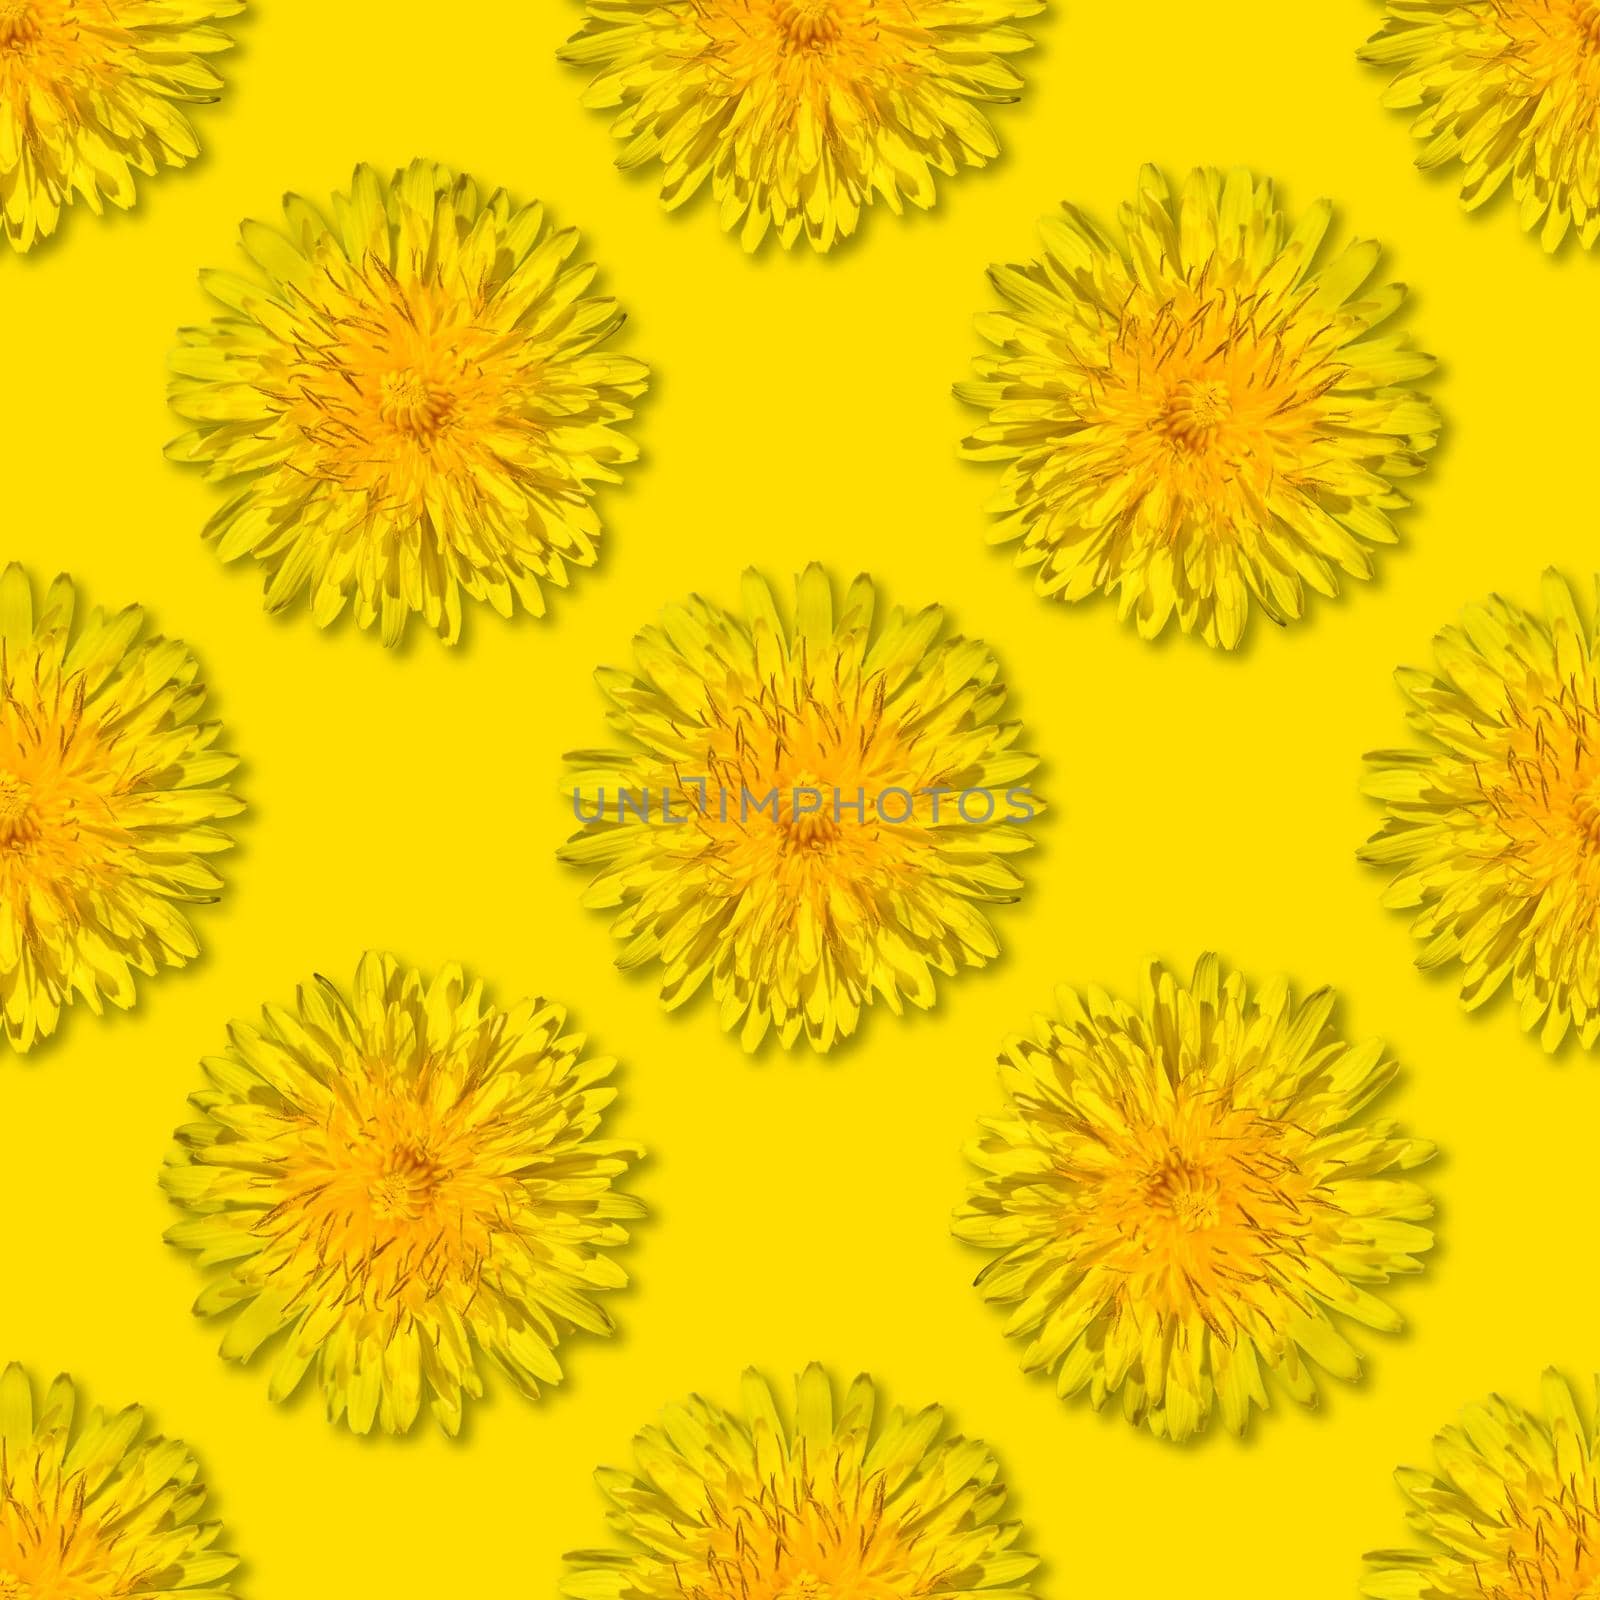 Seamless yellow flower patterm on yellow background. Dandelion flower summer background close up.